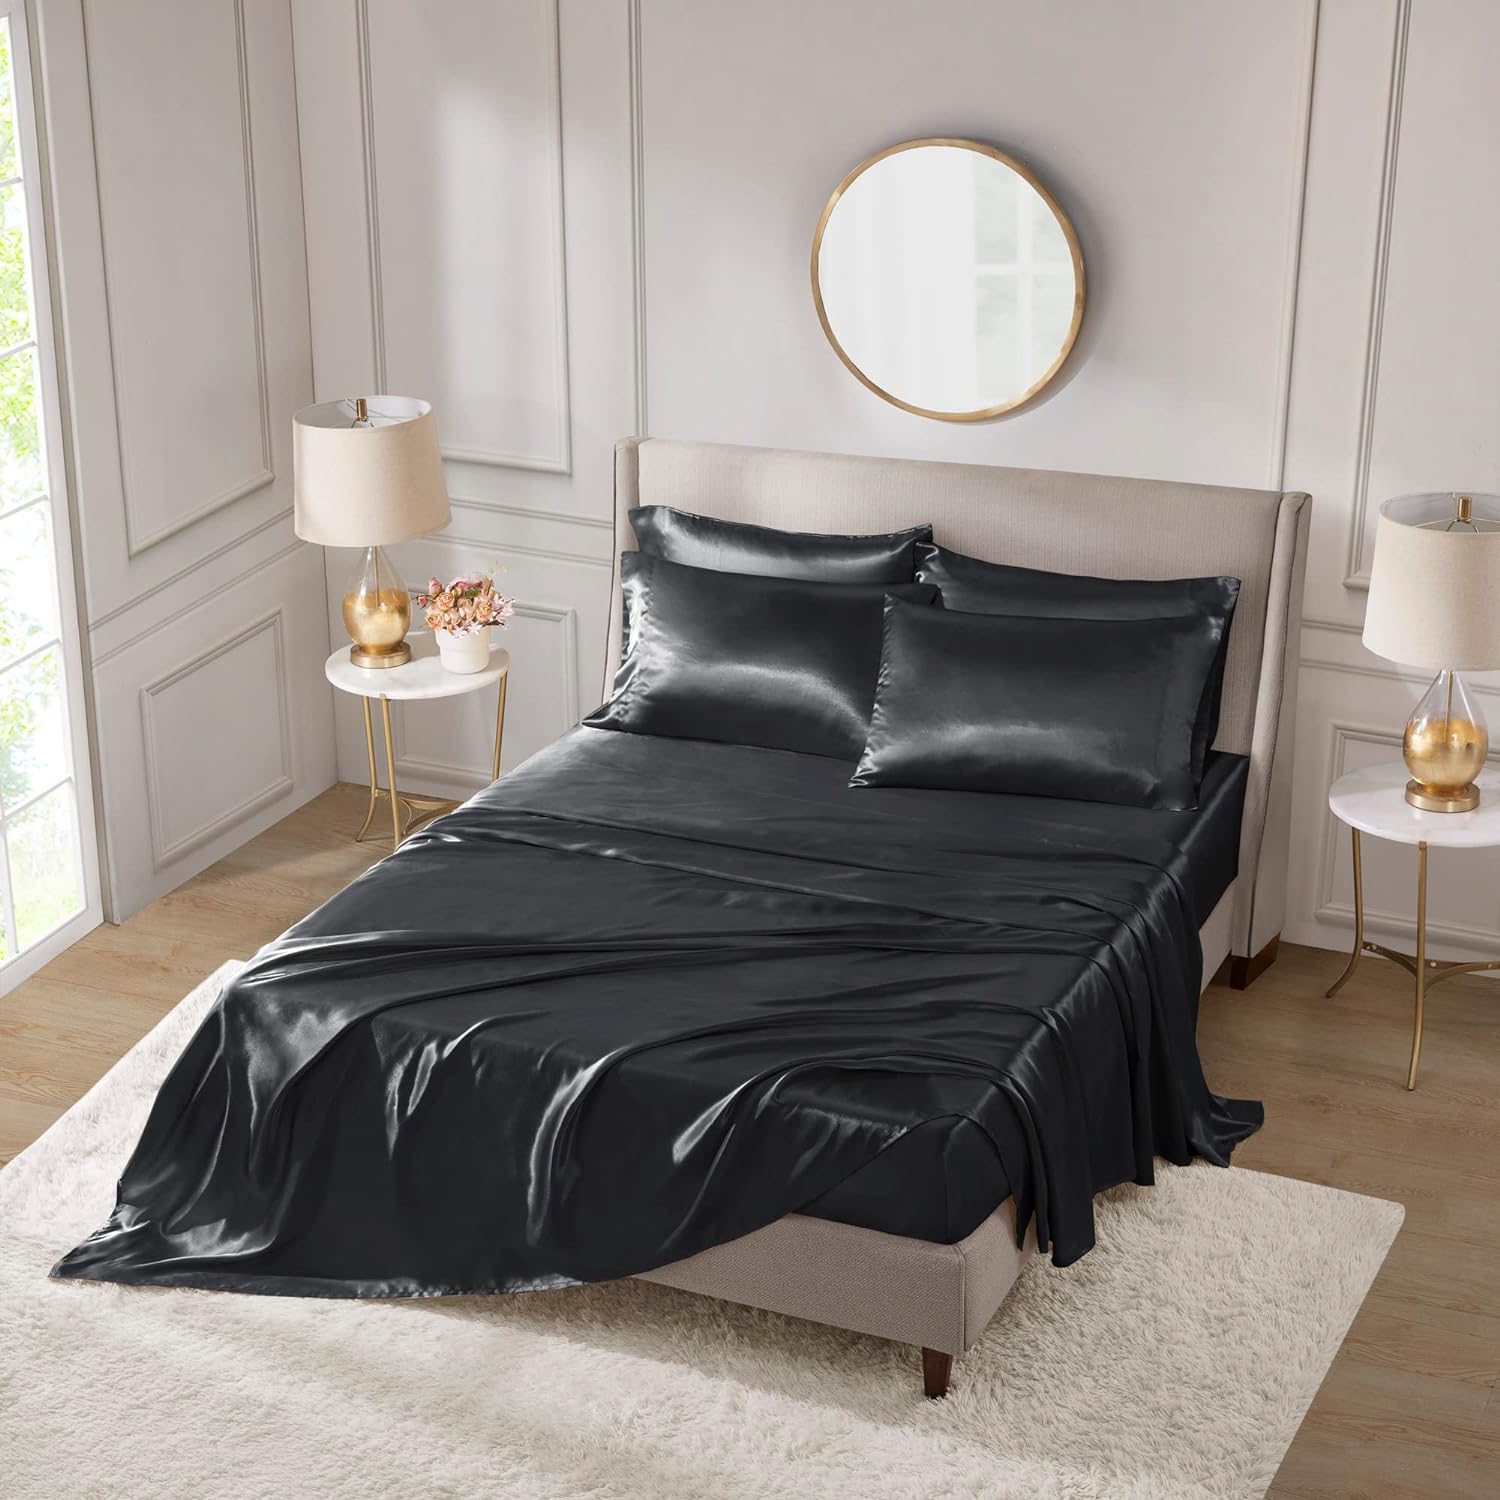 Madison Park Essentials Satin Sheets Queen Size, Luxurious Silky Satin Bed Sheets, Elastic 14 Pocket fits up to 16 Mattress, Wrinkle-Free, Soft Satin Bed Sheet Set, Black 6 Piece